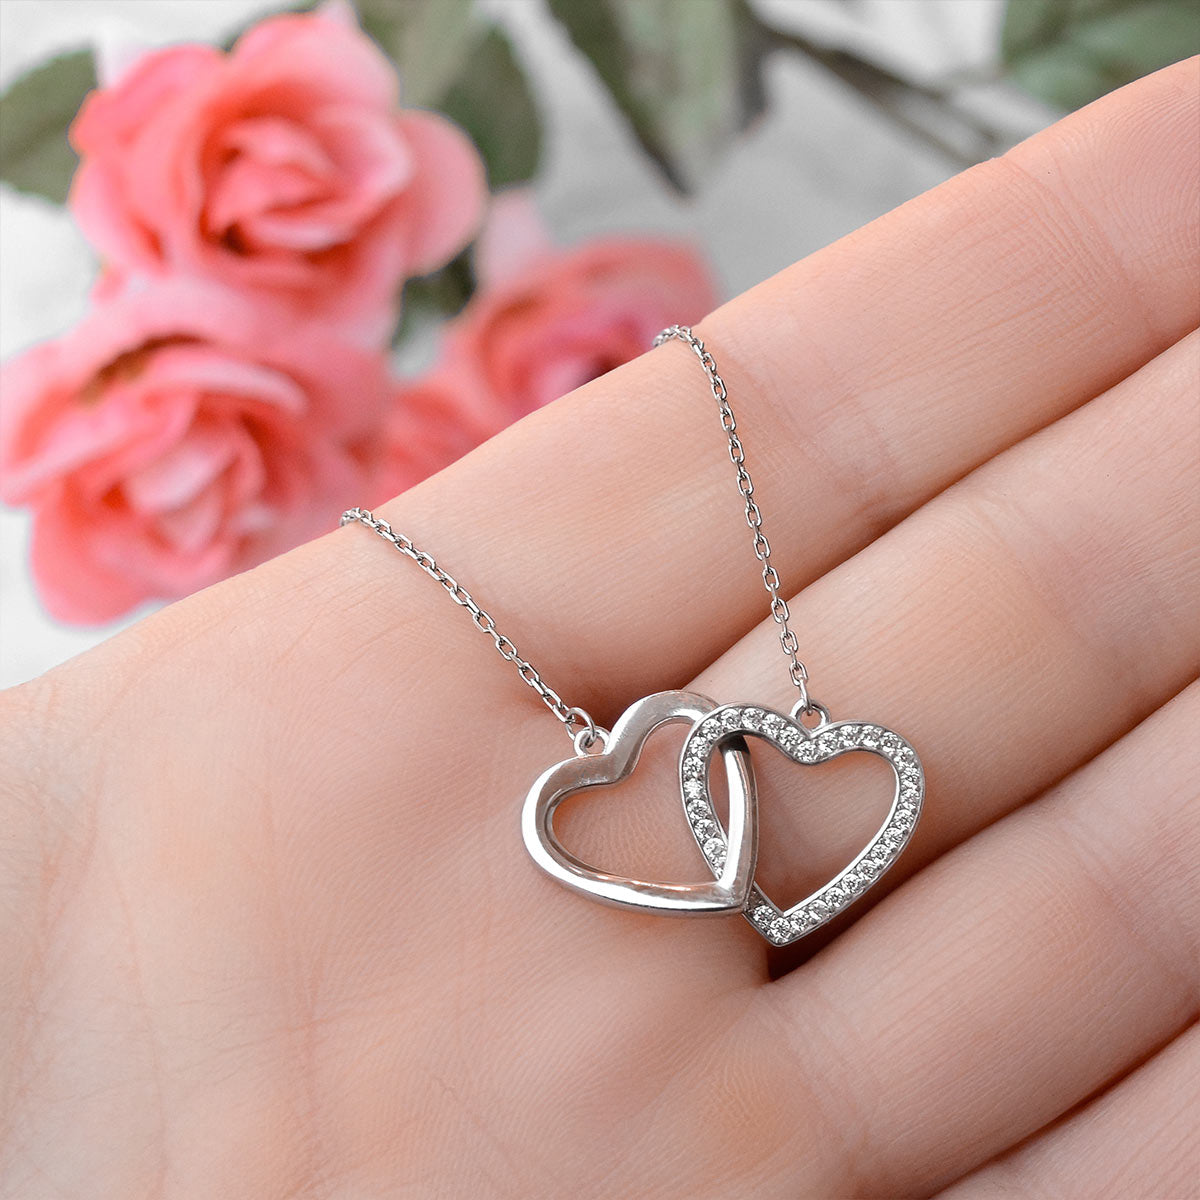 To My Daughter, Love Mom - Sterling Silver Joined Hearts Necklace Gift Set